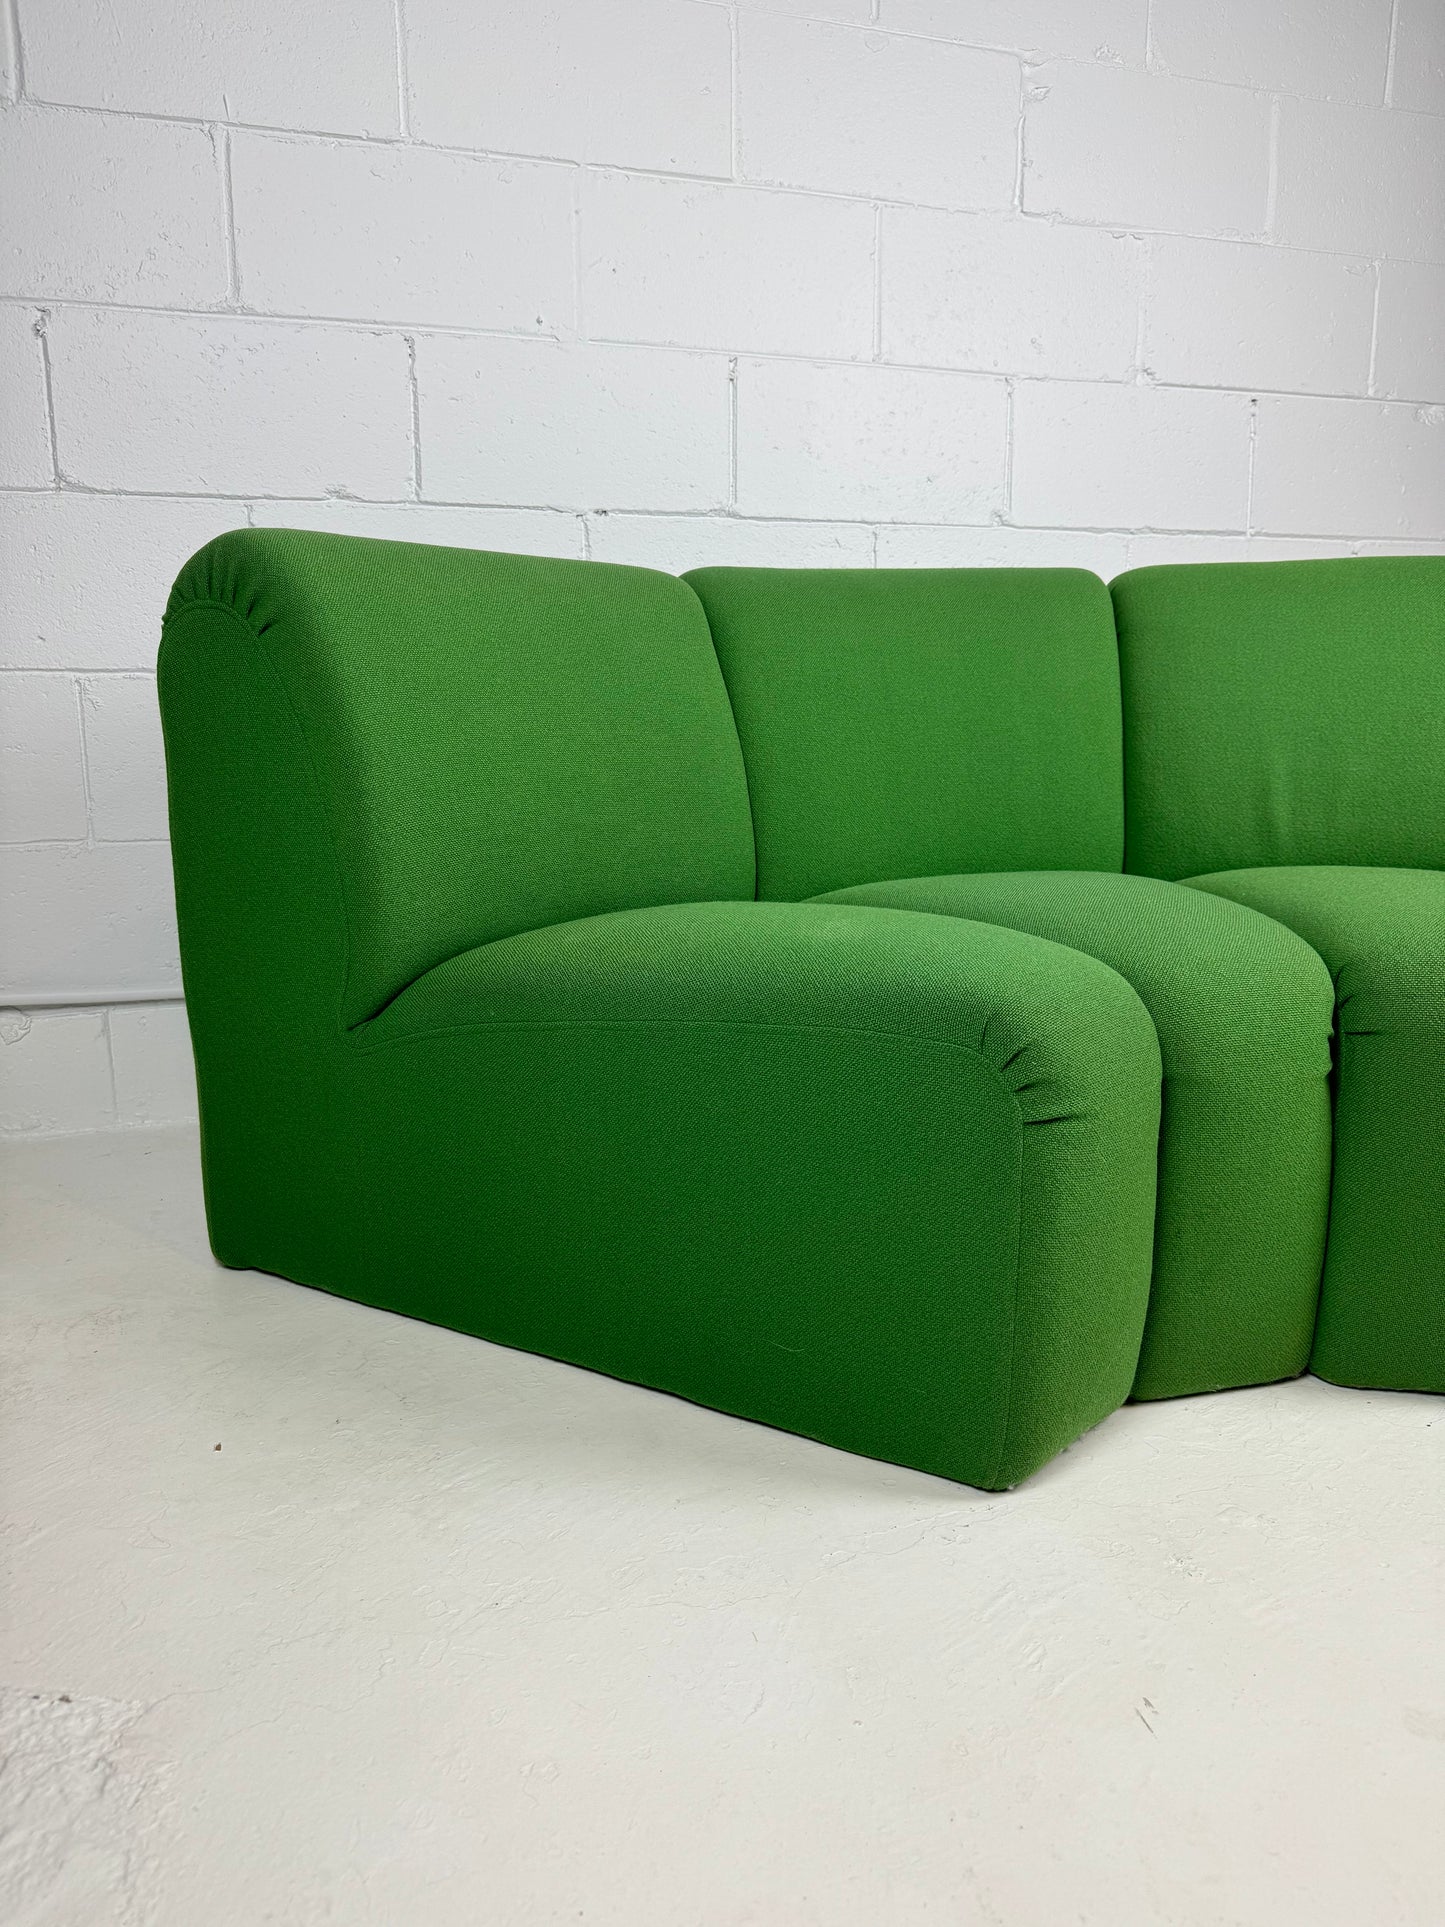 Pierre Paulin Mississippi Sectional Sofa for Artifort